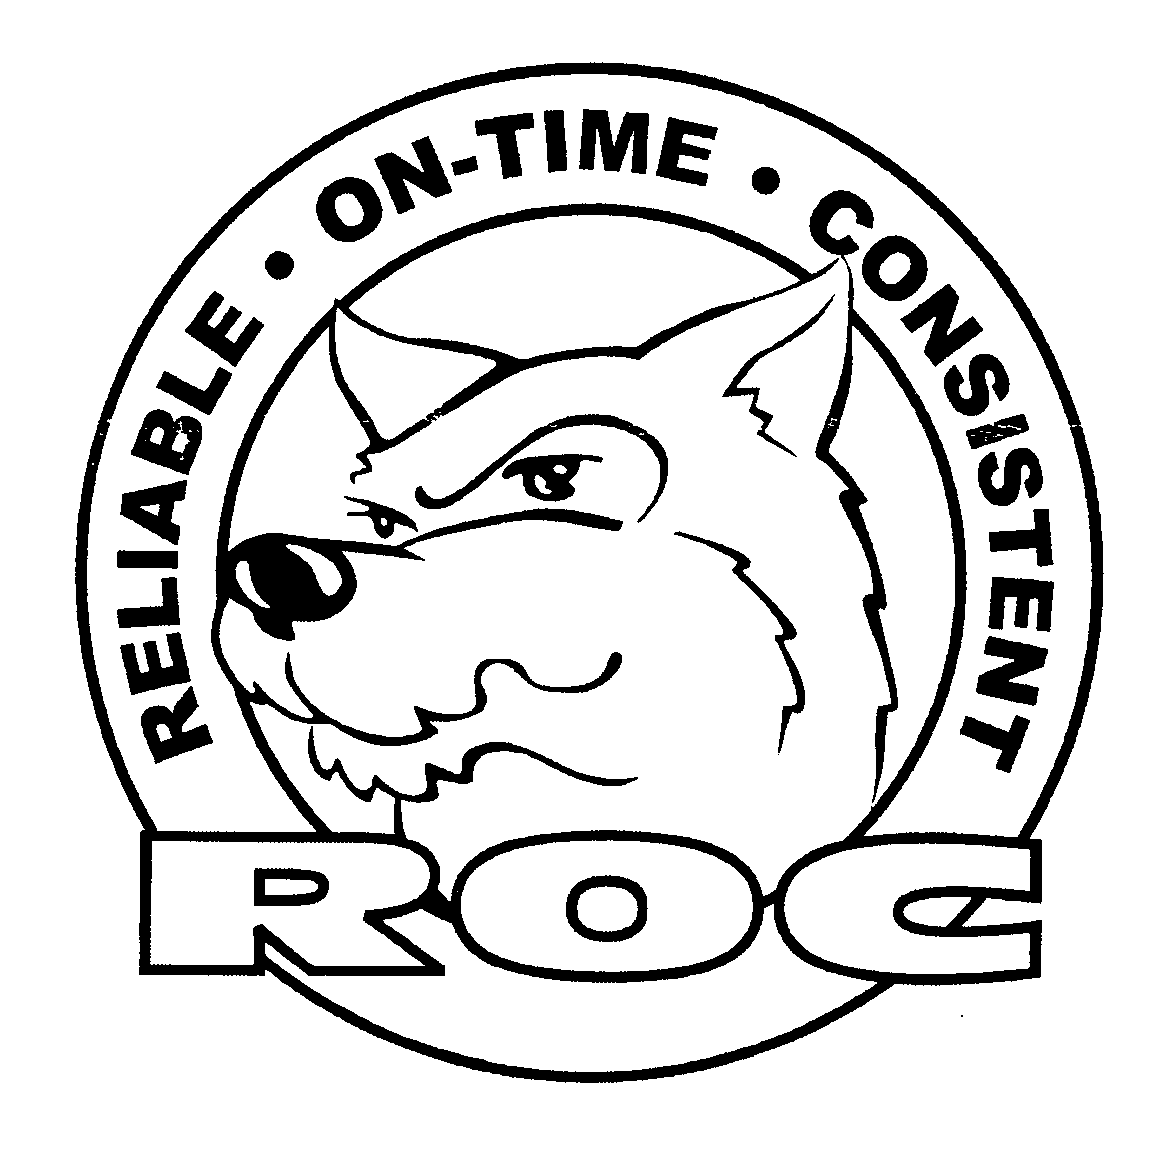  ROC RELIABLE ON-TIME CONSISTENT